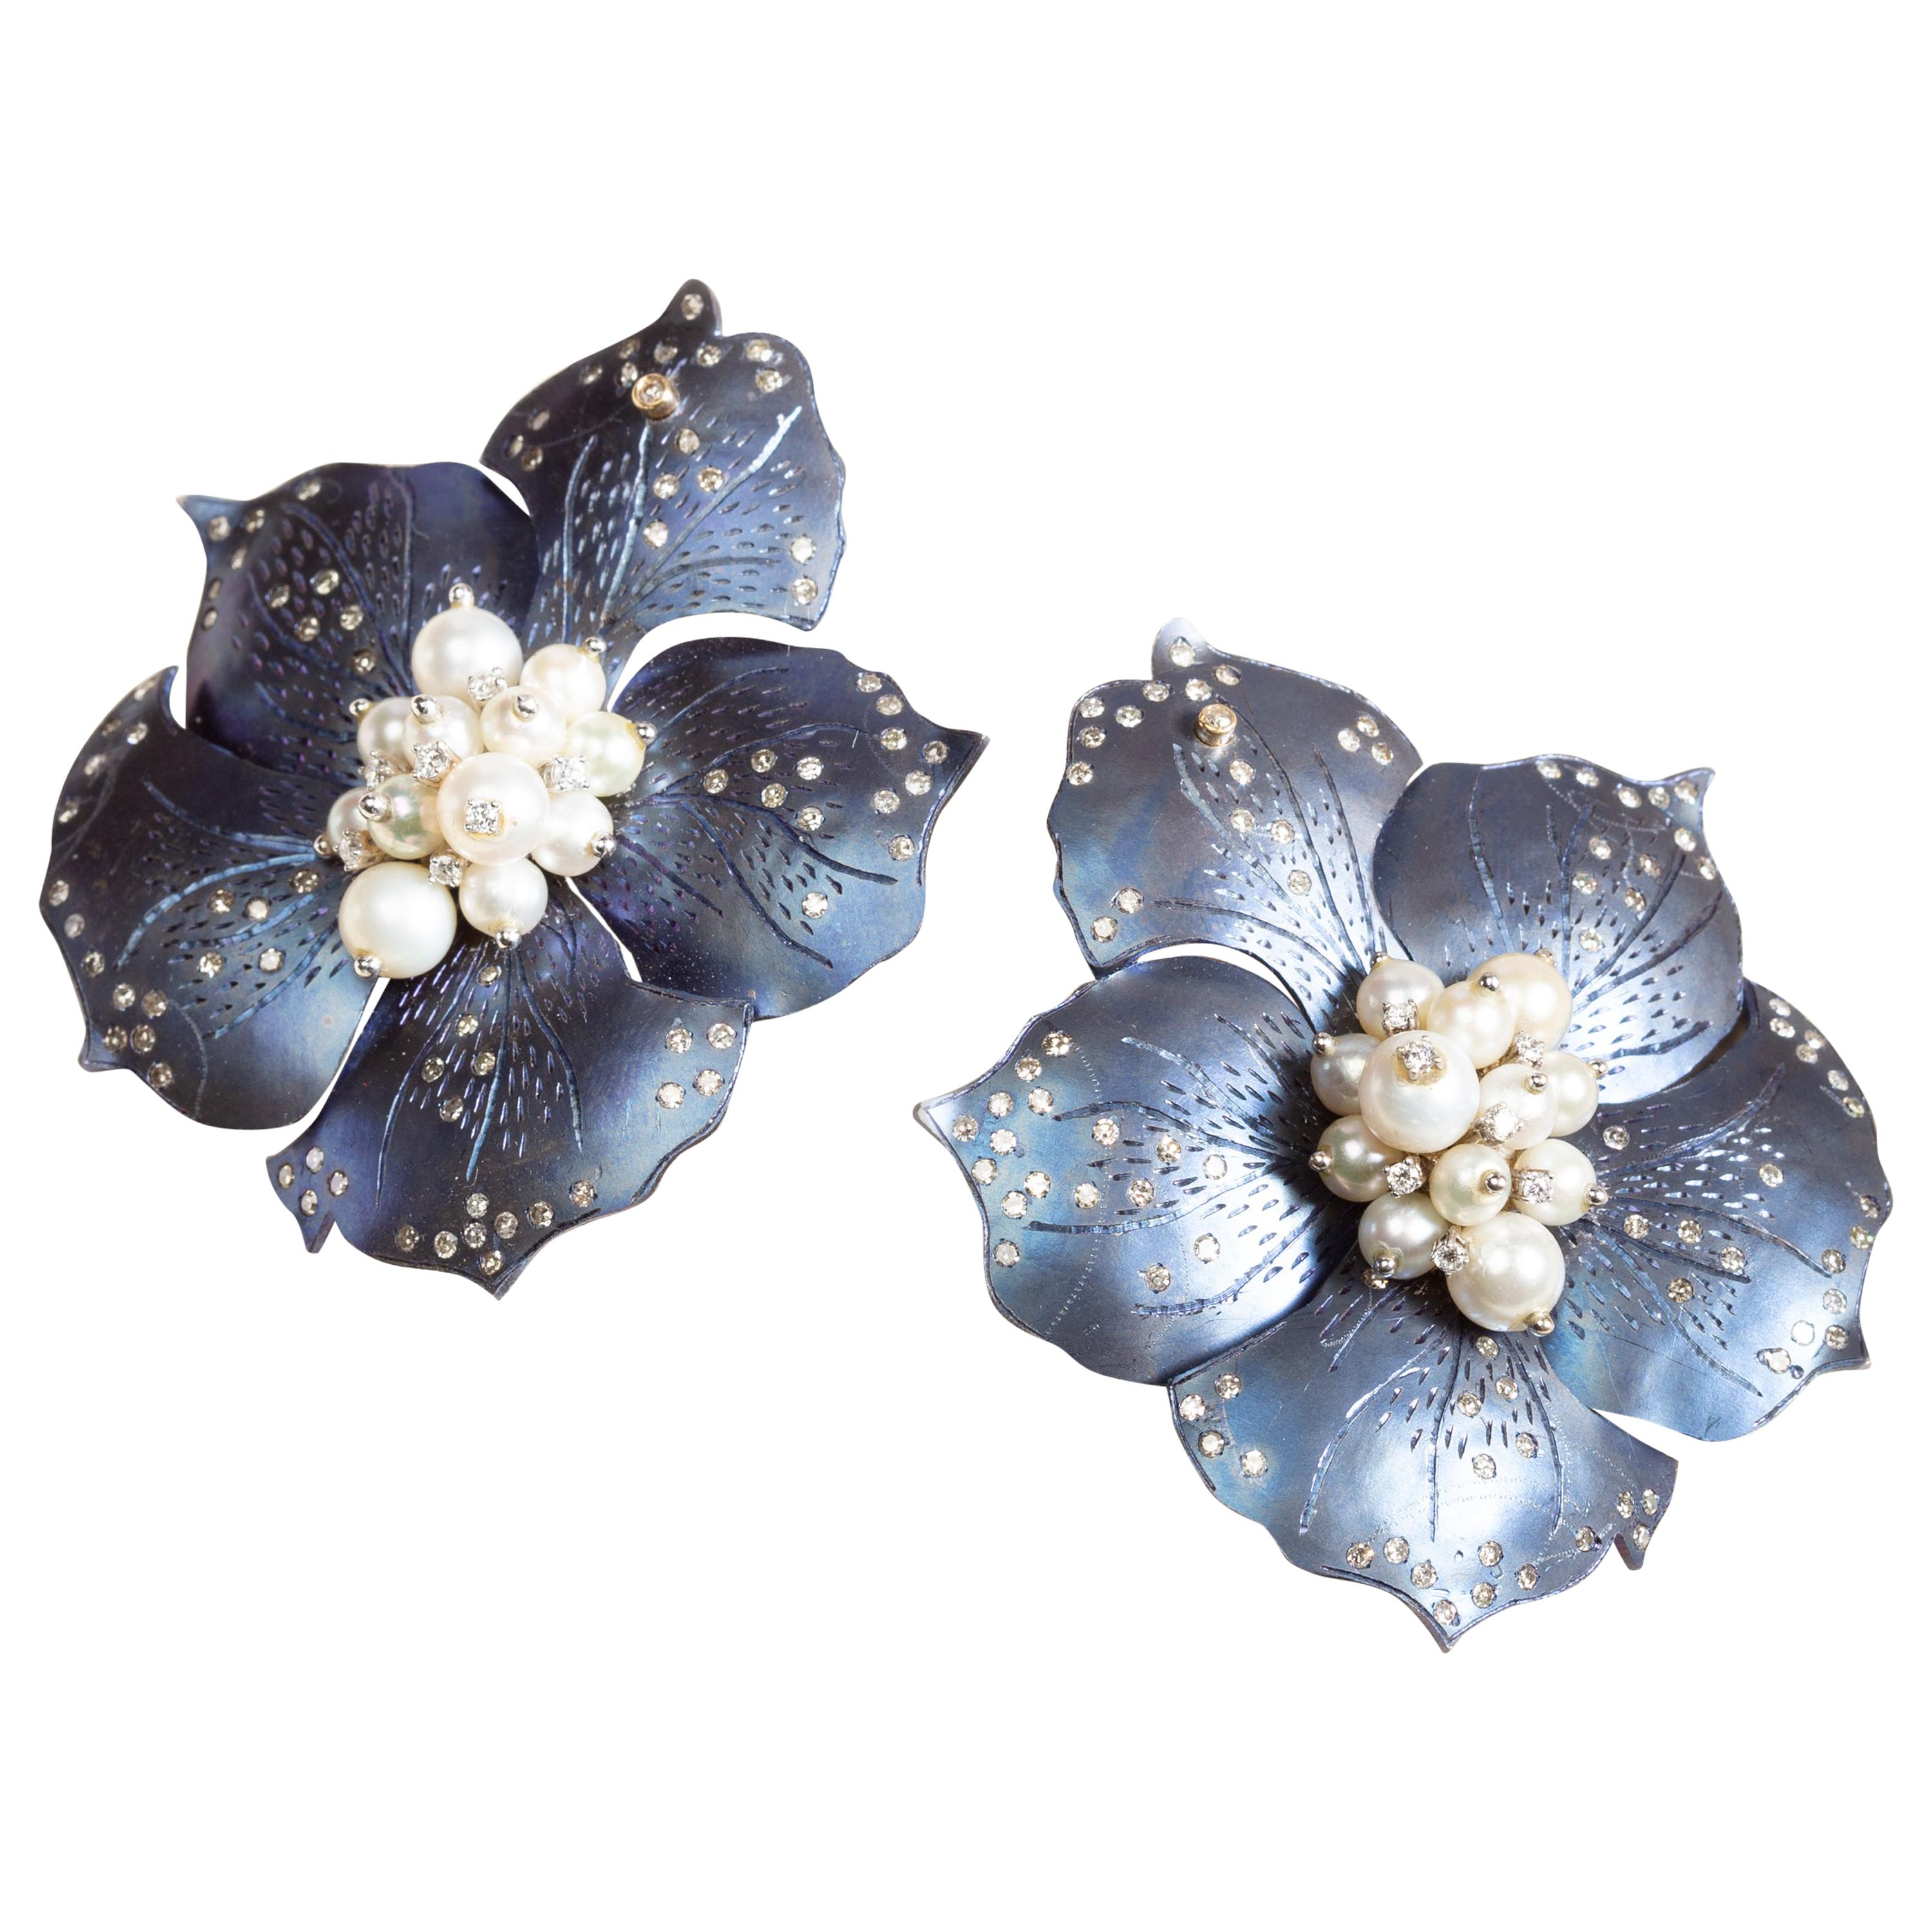 Blue Titanium Flower Earrings with Diamonds and Pearls